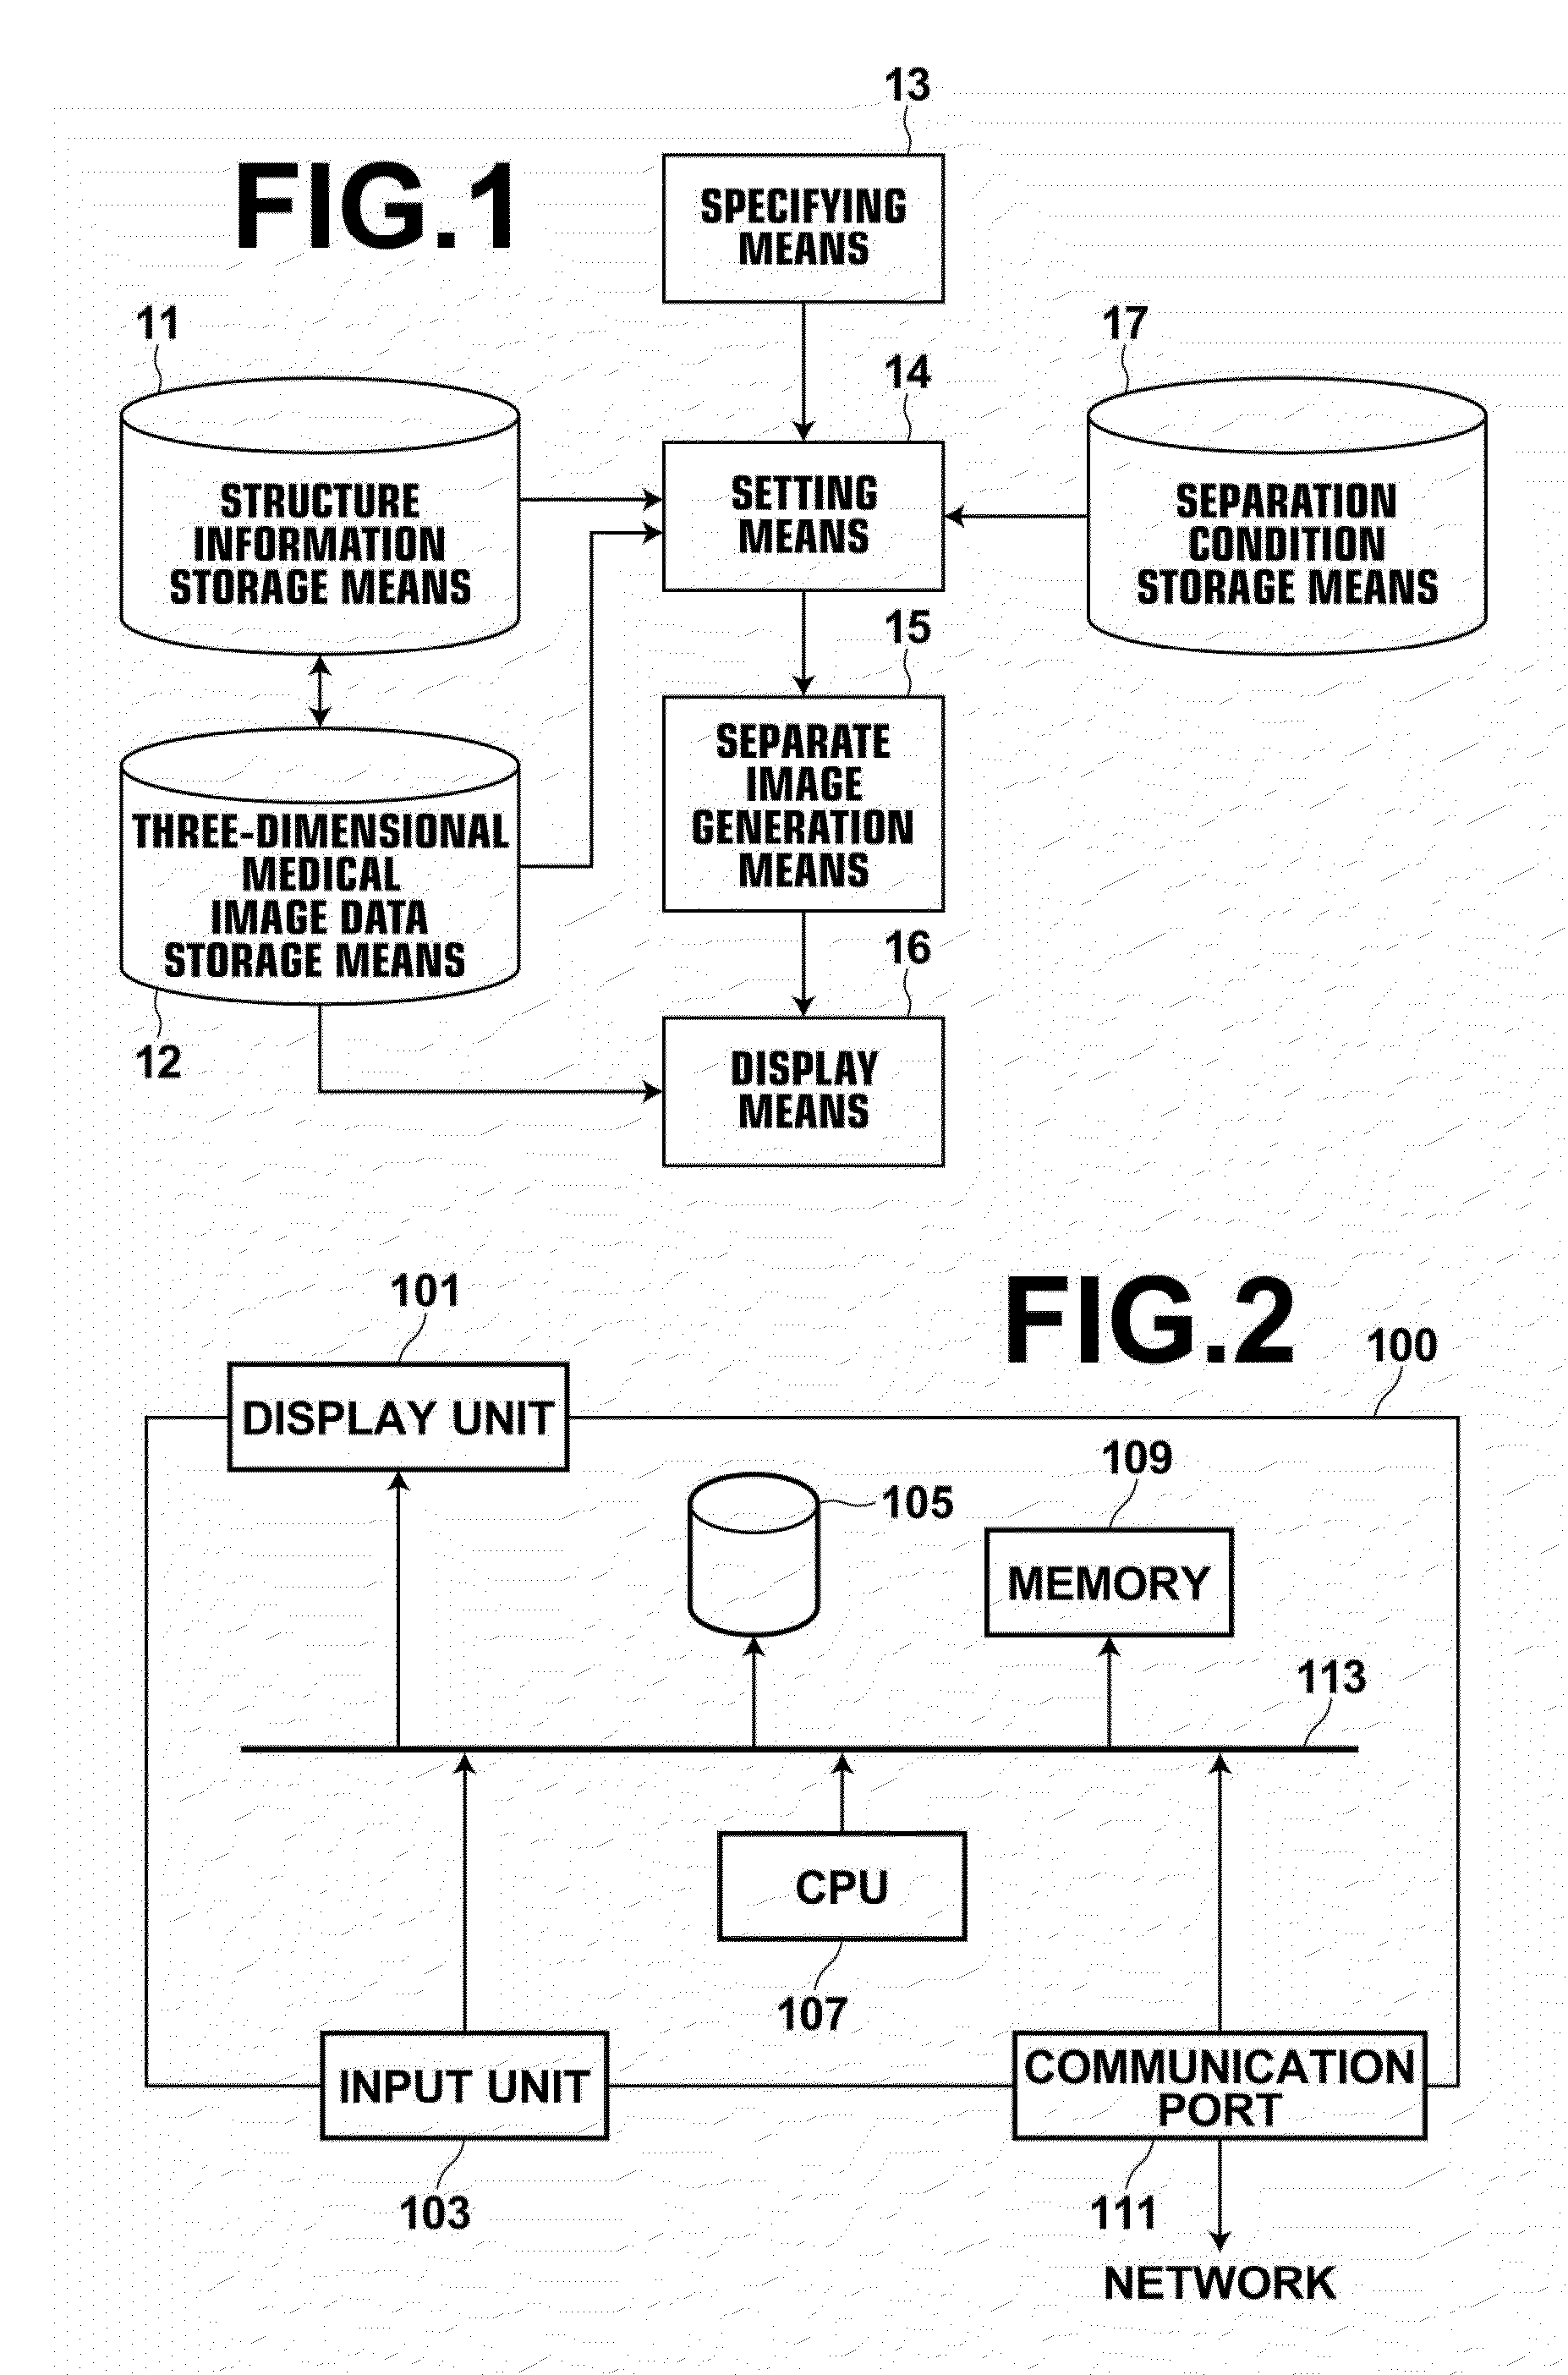 Image diagnosis support apparatus, method and program